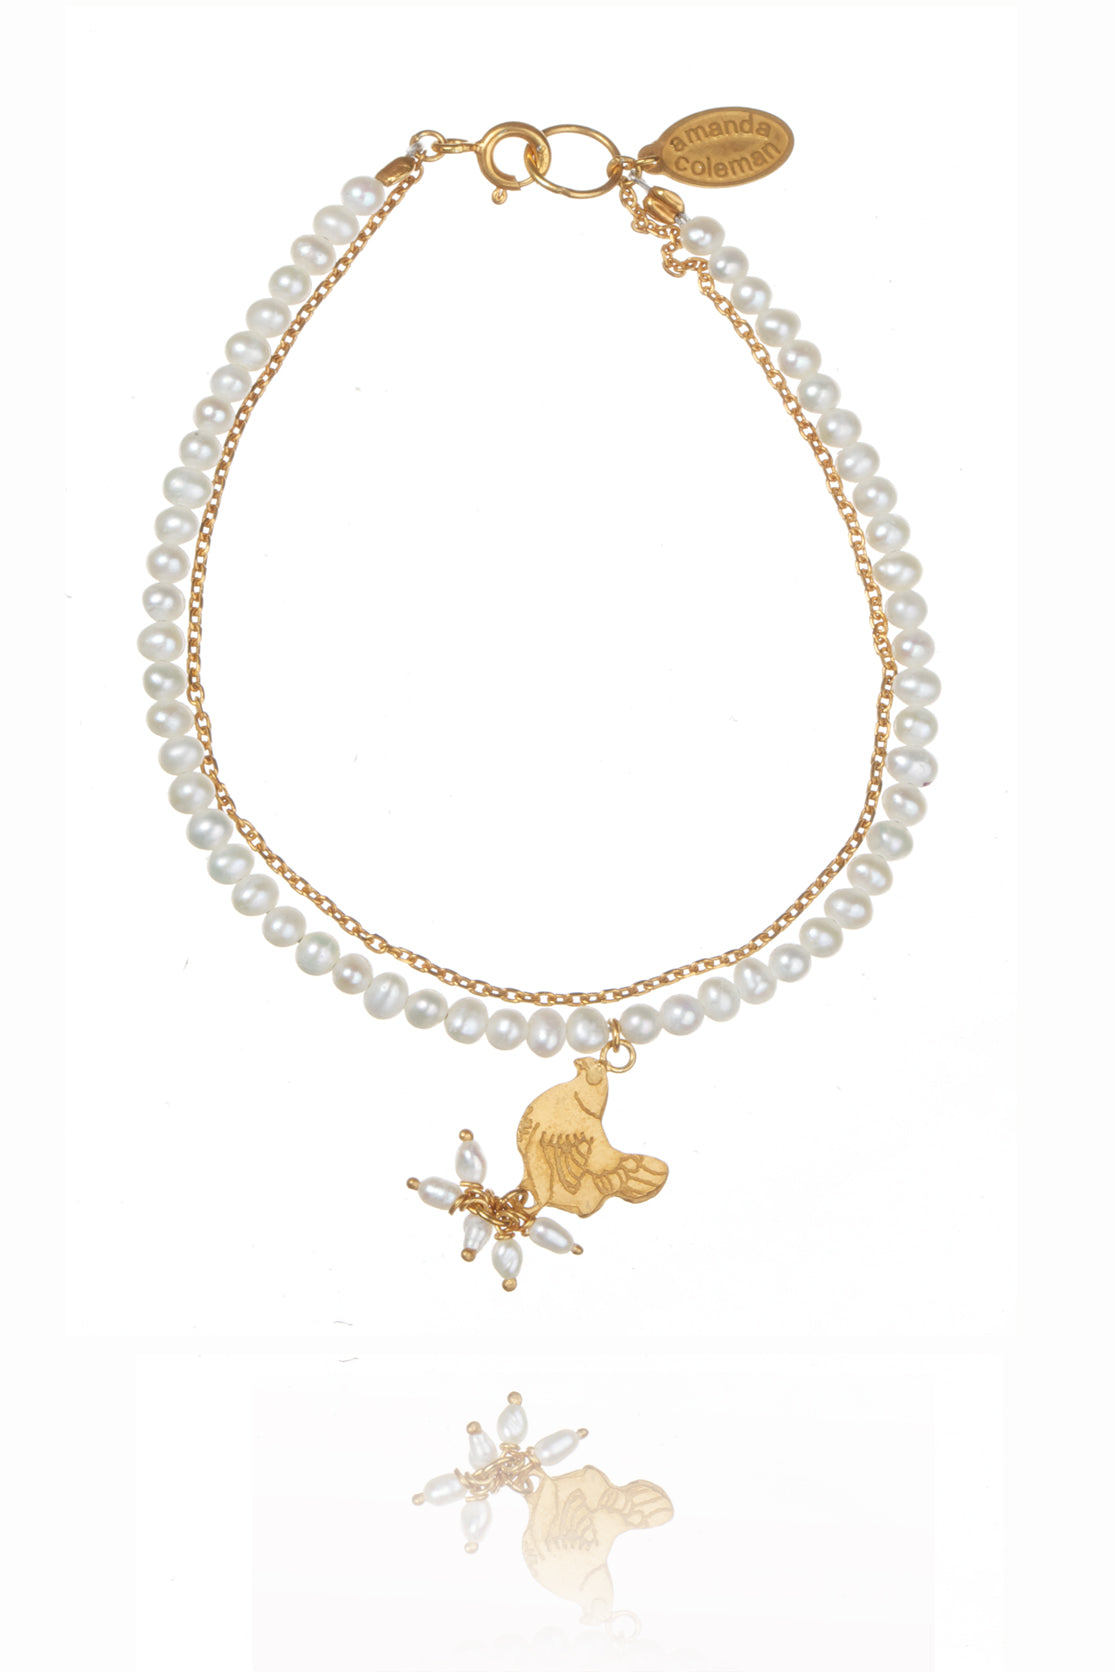 gold plated chicken bracelet with white pearl detailing